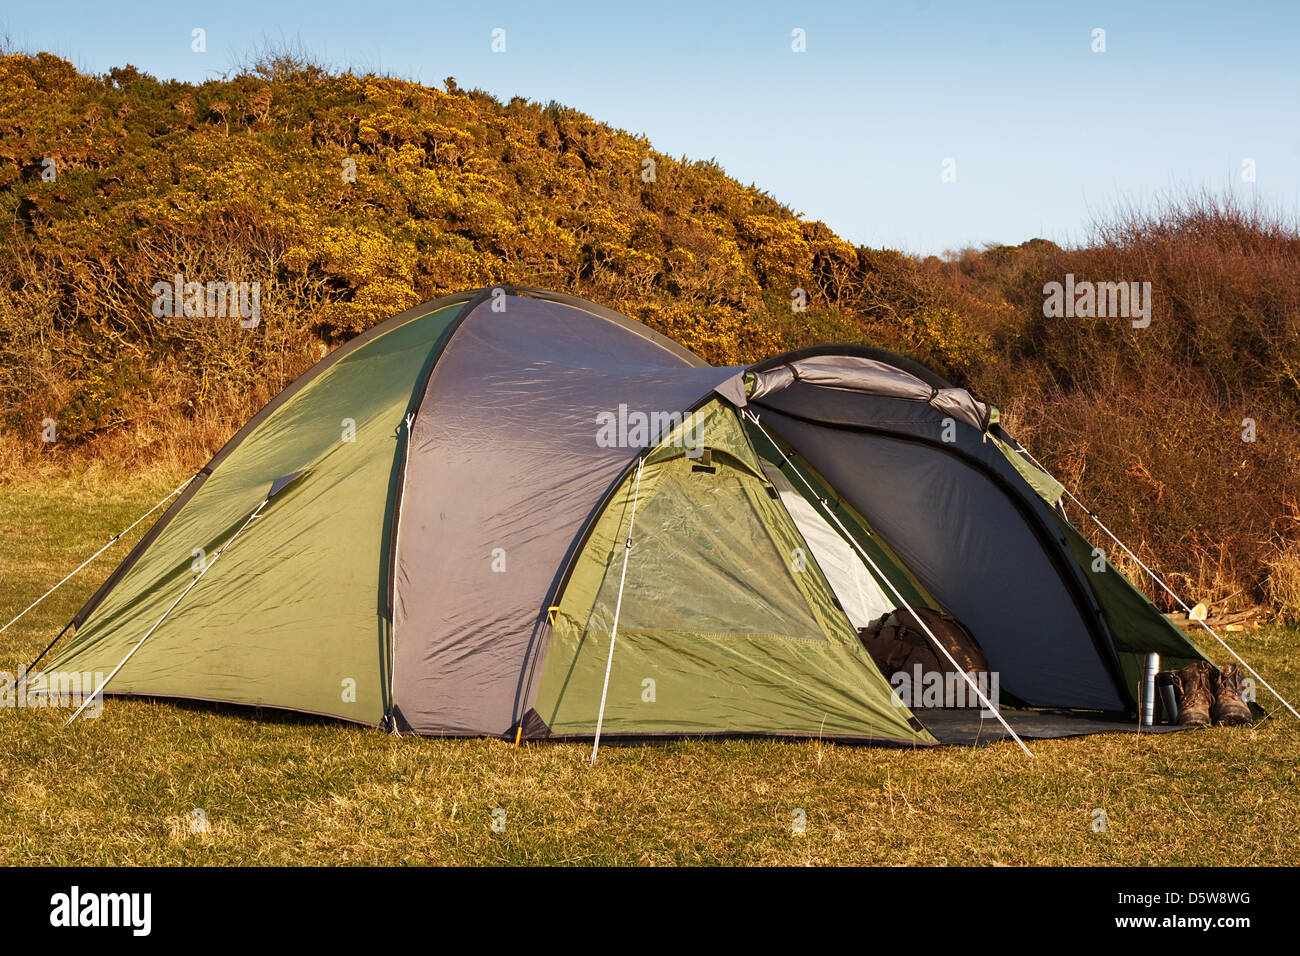 dome tent pitched in field for wild camping in the great outdoors with front flap open showing interior Stock Photo